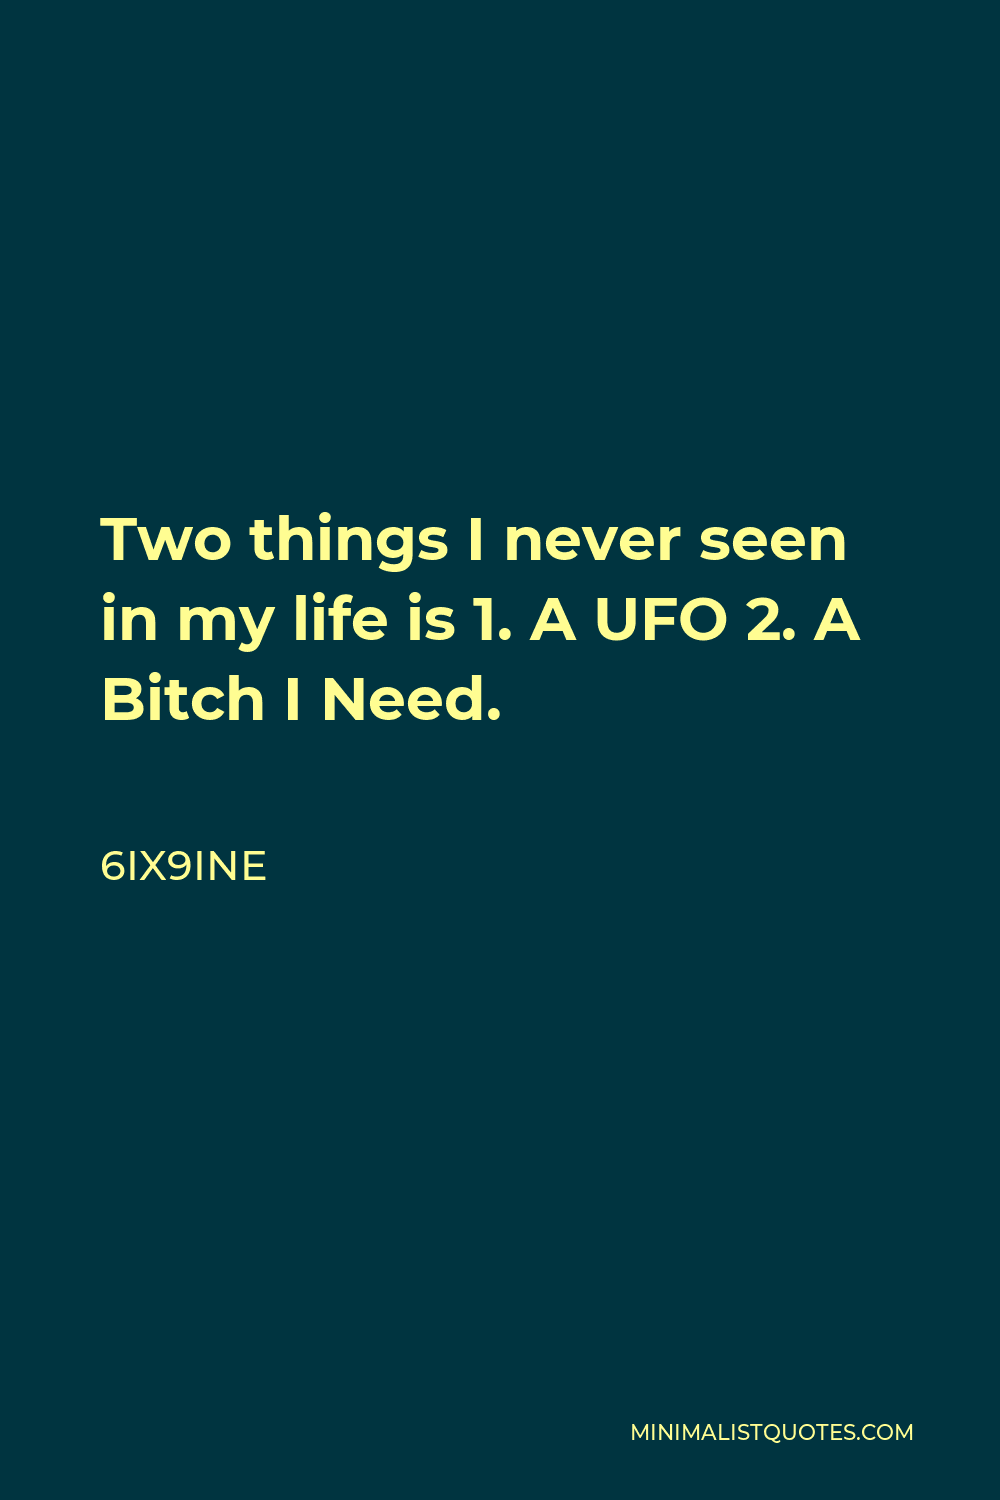 6ix9ine Quote - Two things I never seen in my life is 1. A UFO 2. A Bitch I Need.